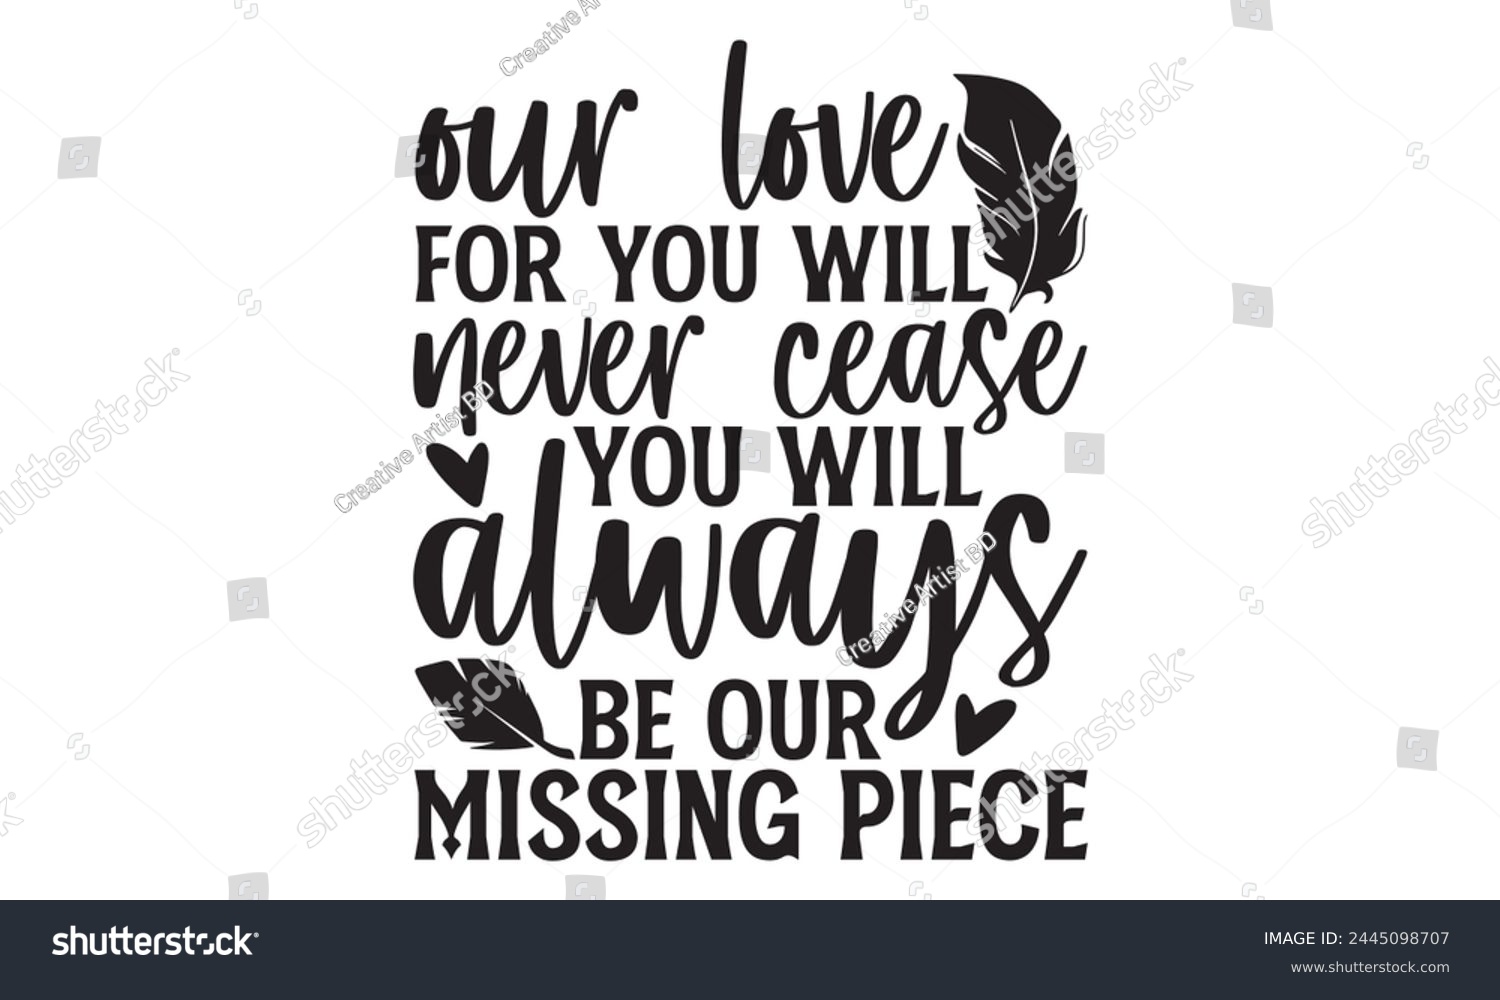 SVG of Our love for you will never cease you will always be our missing piece - Memorial T Shirt Design, Modern calligraphy, Cutting and Silhouette, for prints on bags, cups, card, posters. svg